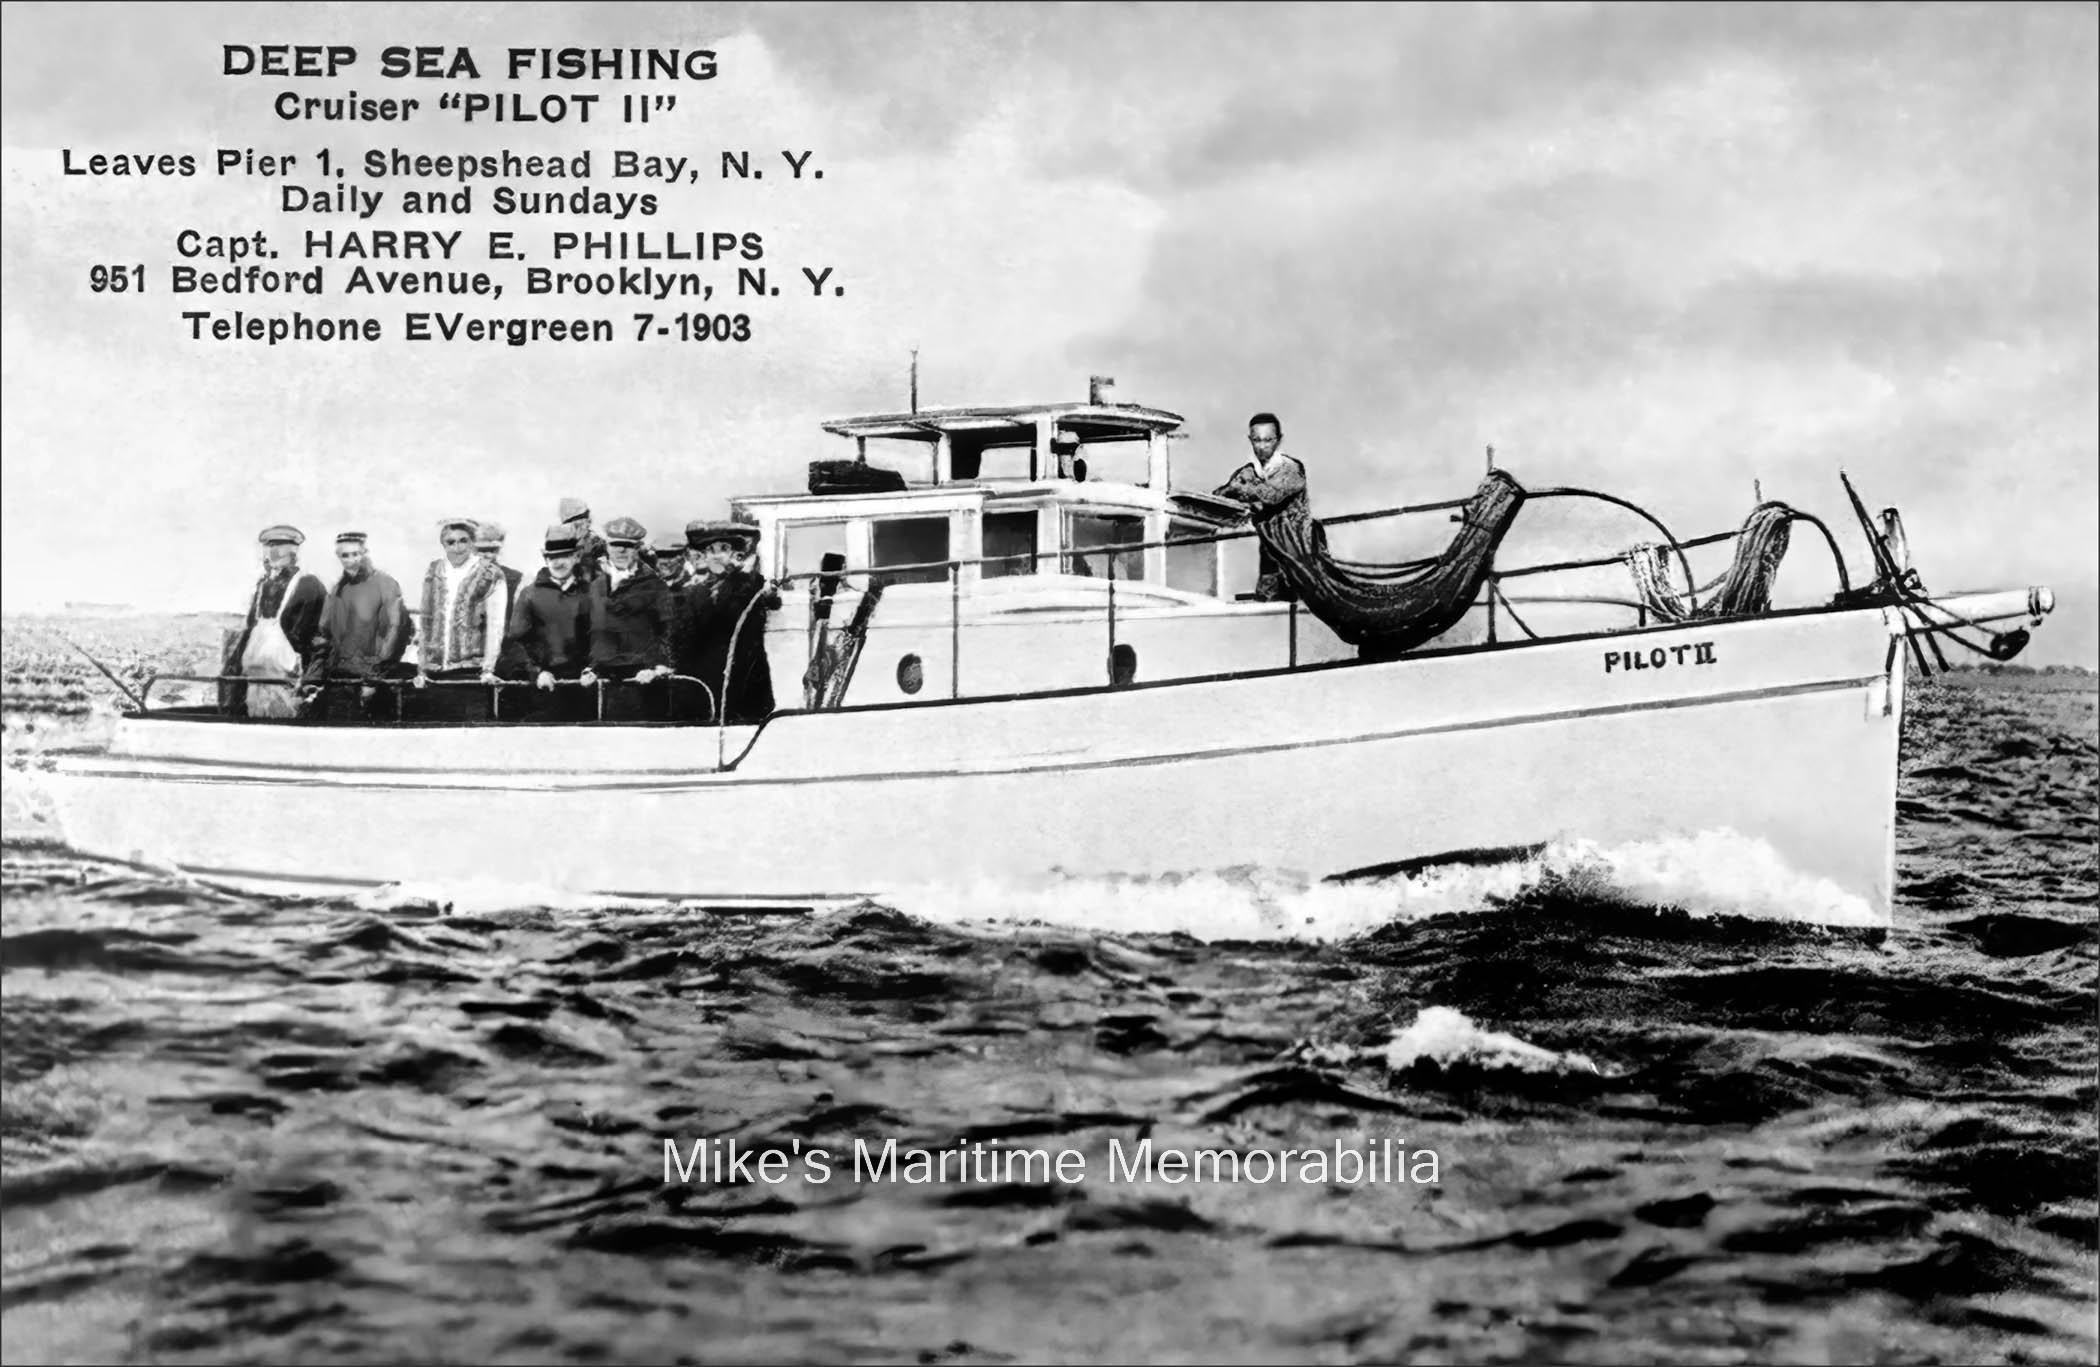 PILOT II, Brooklyn, NY – 1932 Over the years, there were seven party boats named "PILOT II" at Sheepshead Bay. This 1932 advertising postcard shows Captain Harry Phillip's first "PILOT II" from Sheepshead Bay, Brooklyn, NY. In 1930, Ernest Fiedler of Bergen Beach Boat Works built the 35-foot "PILOT II" in the Mill Basin section of Brooklyn, NY. It was equipped with a single 40 HP gasoline engine. This 'Skipjack' style party boat was one of the many vessels built for the Sheepshead Bay fleet by Bergen Beach Boat Works. In 1937, Captain Harry Phillips again turned to Ernest Fiedler to build the second "PILOT II" and in 1939, he sold the first "PILOT II" to Charles Brown who renamed it "DOLPHIN". The postcard is courtesy of Captain Tony 'Mo' Barbato.